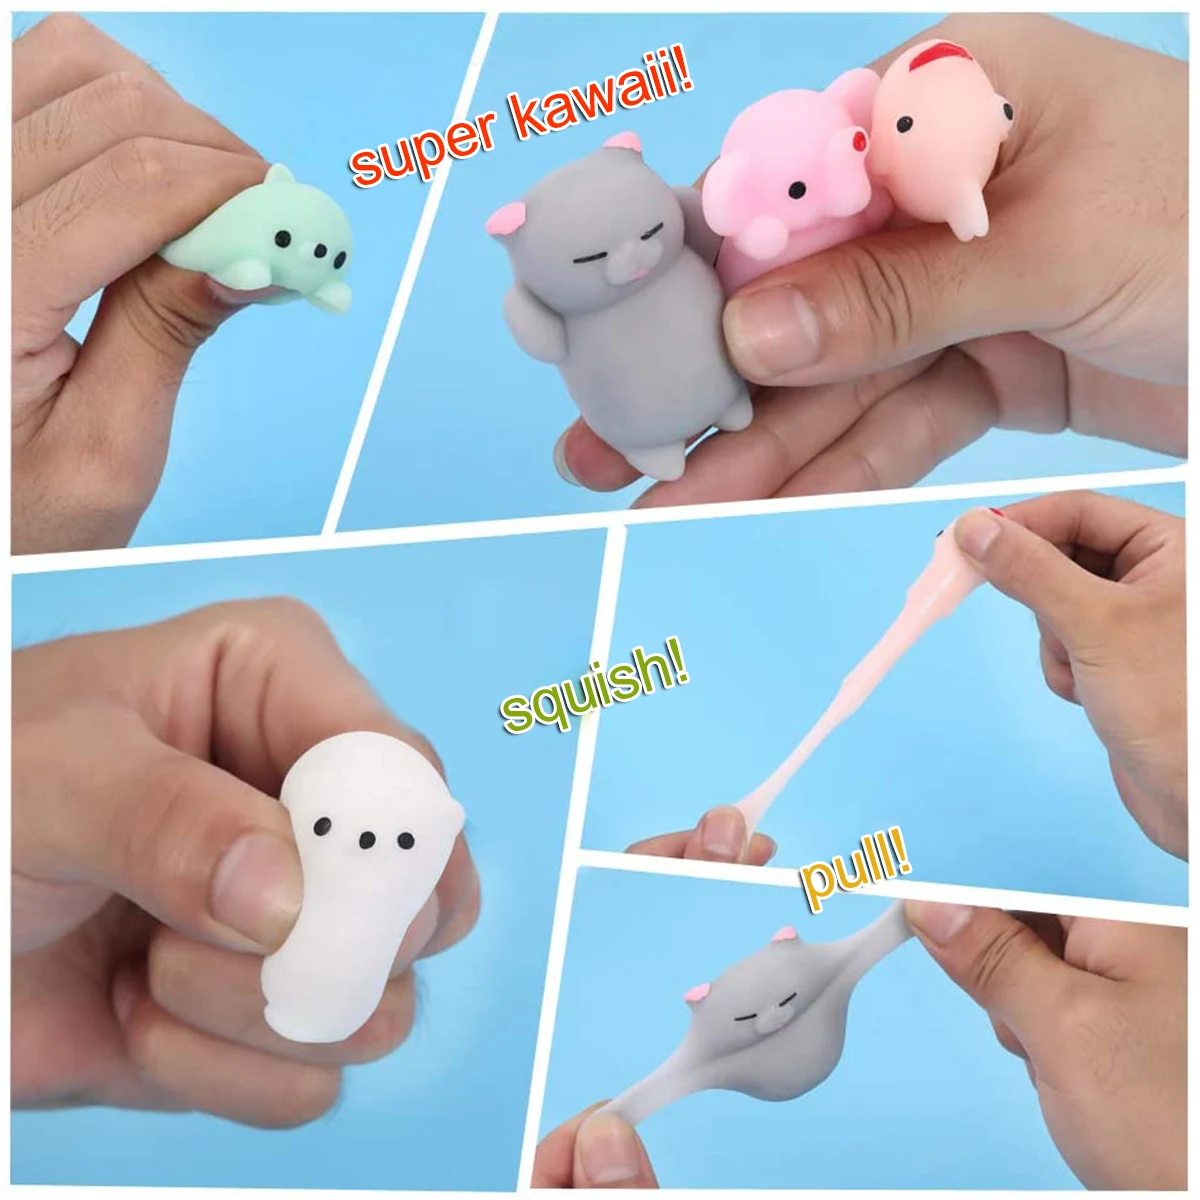 fidget squishy balls 24pcs Fidget Toys Party Favors Squishy Toy Kids Party Favors Mini Kawaii Squishies Mochi Stress Reliever Anxiety Toys stress relieving ball